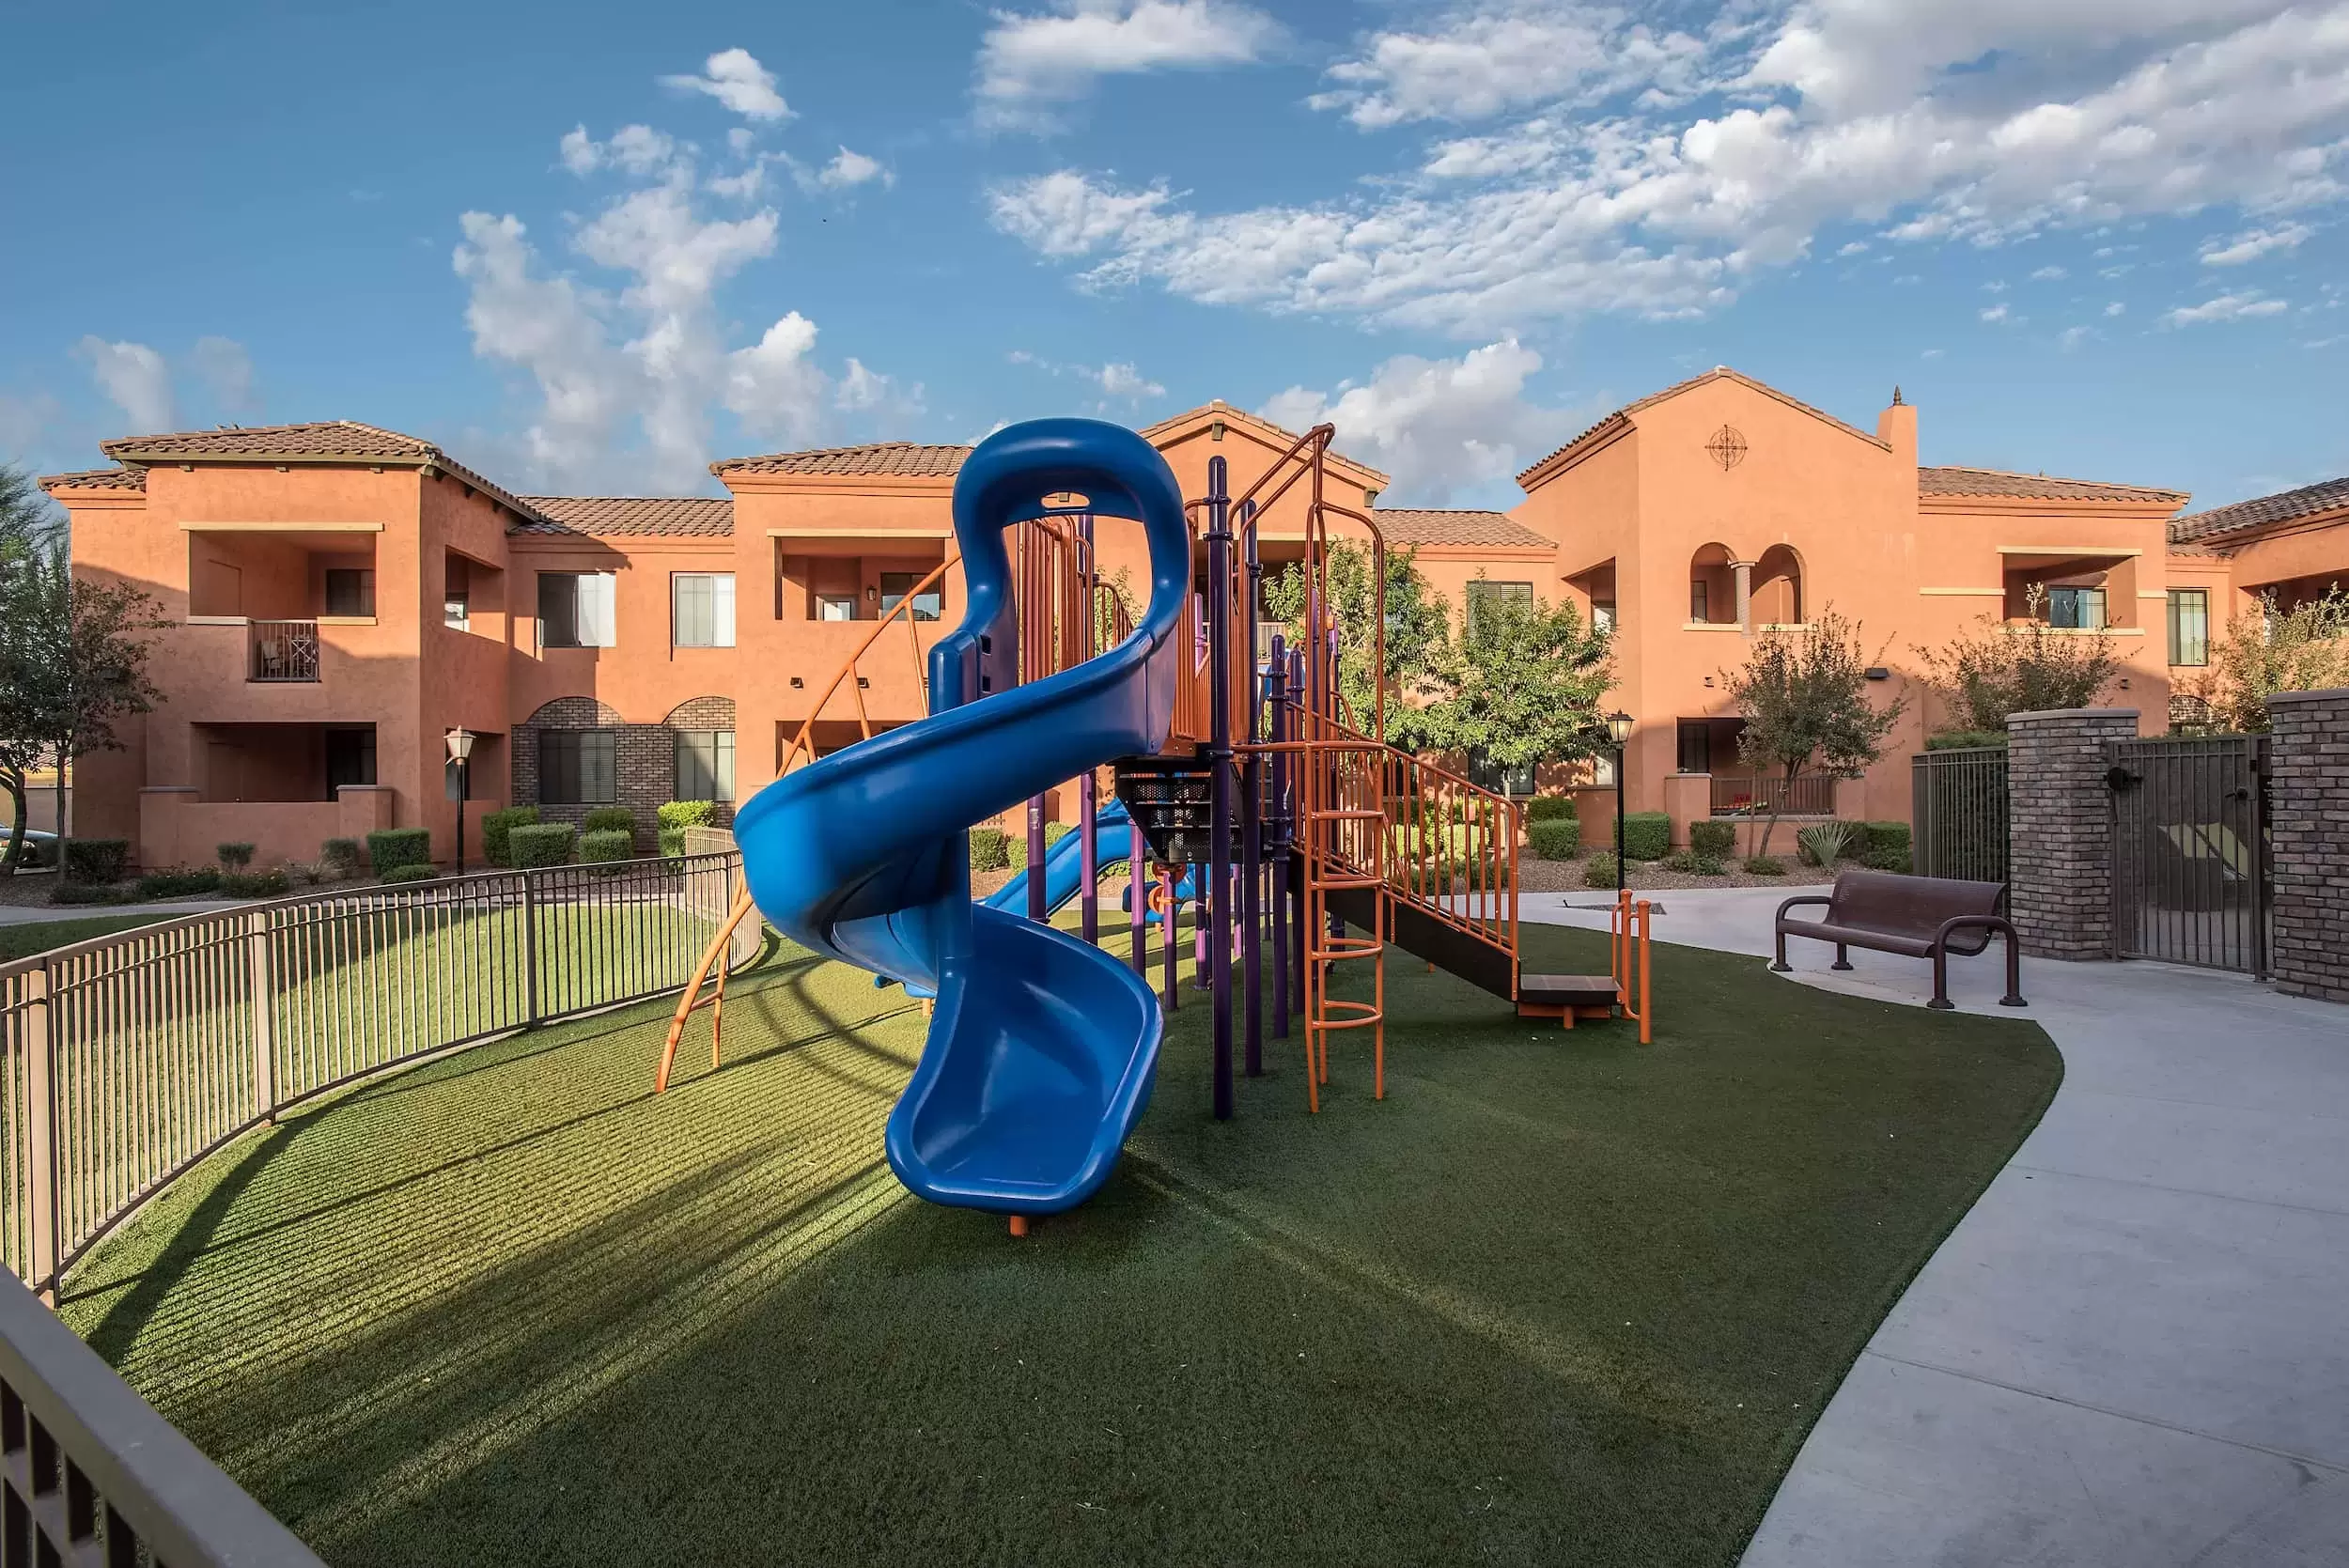 A playground with a slide for the children in the apartment community.